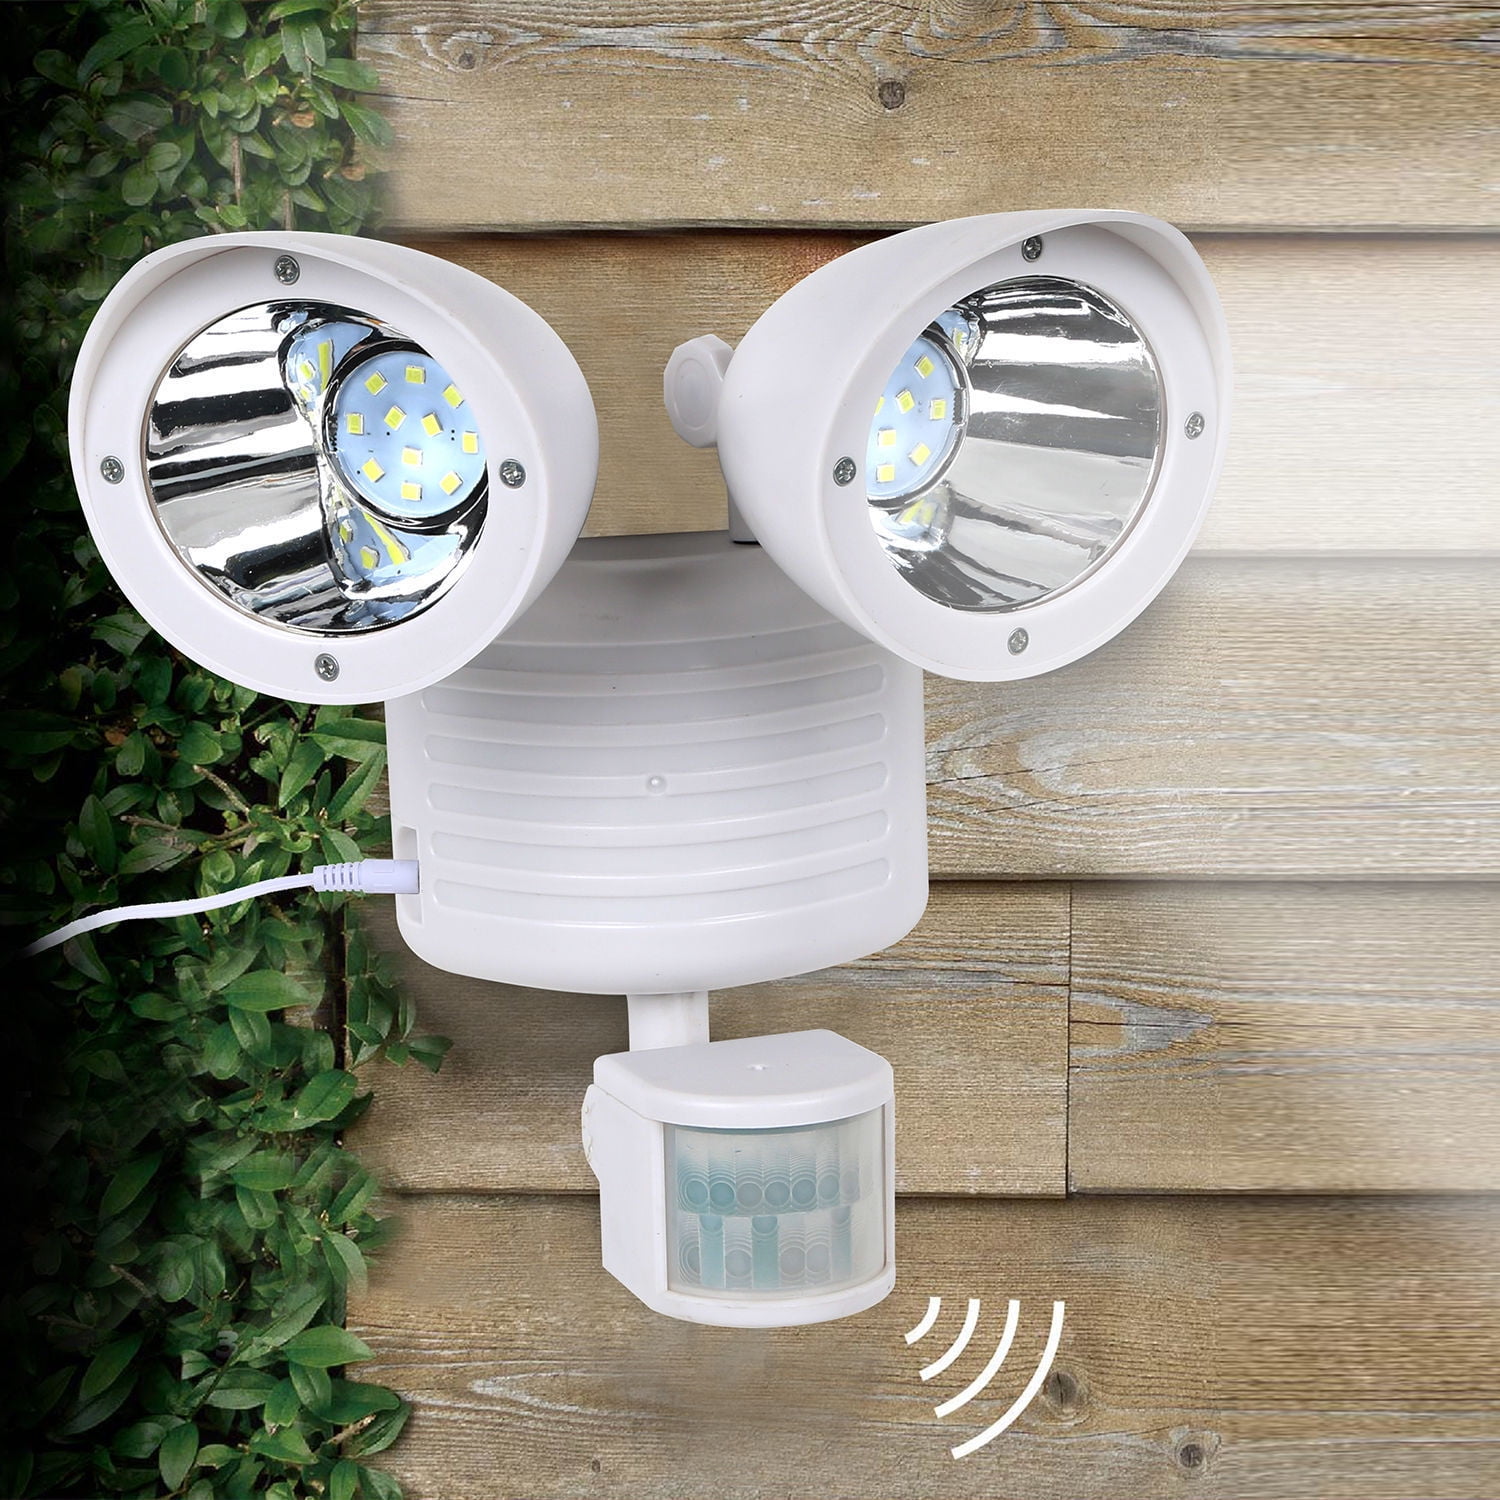 Outdoor Dual-Lamp Spot Light With Motion Sensor Weather Proof 